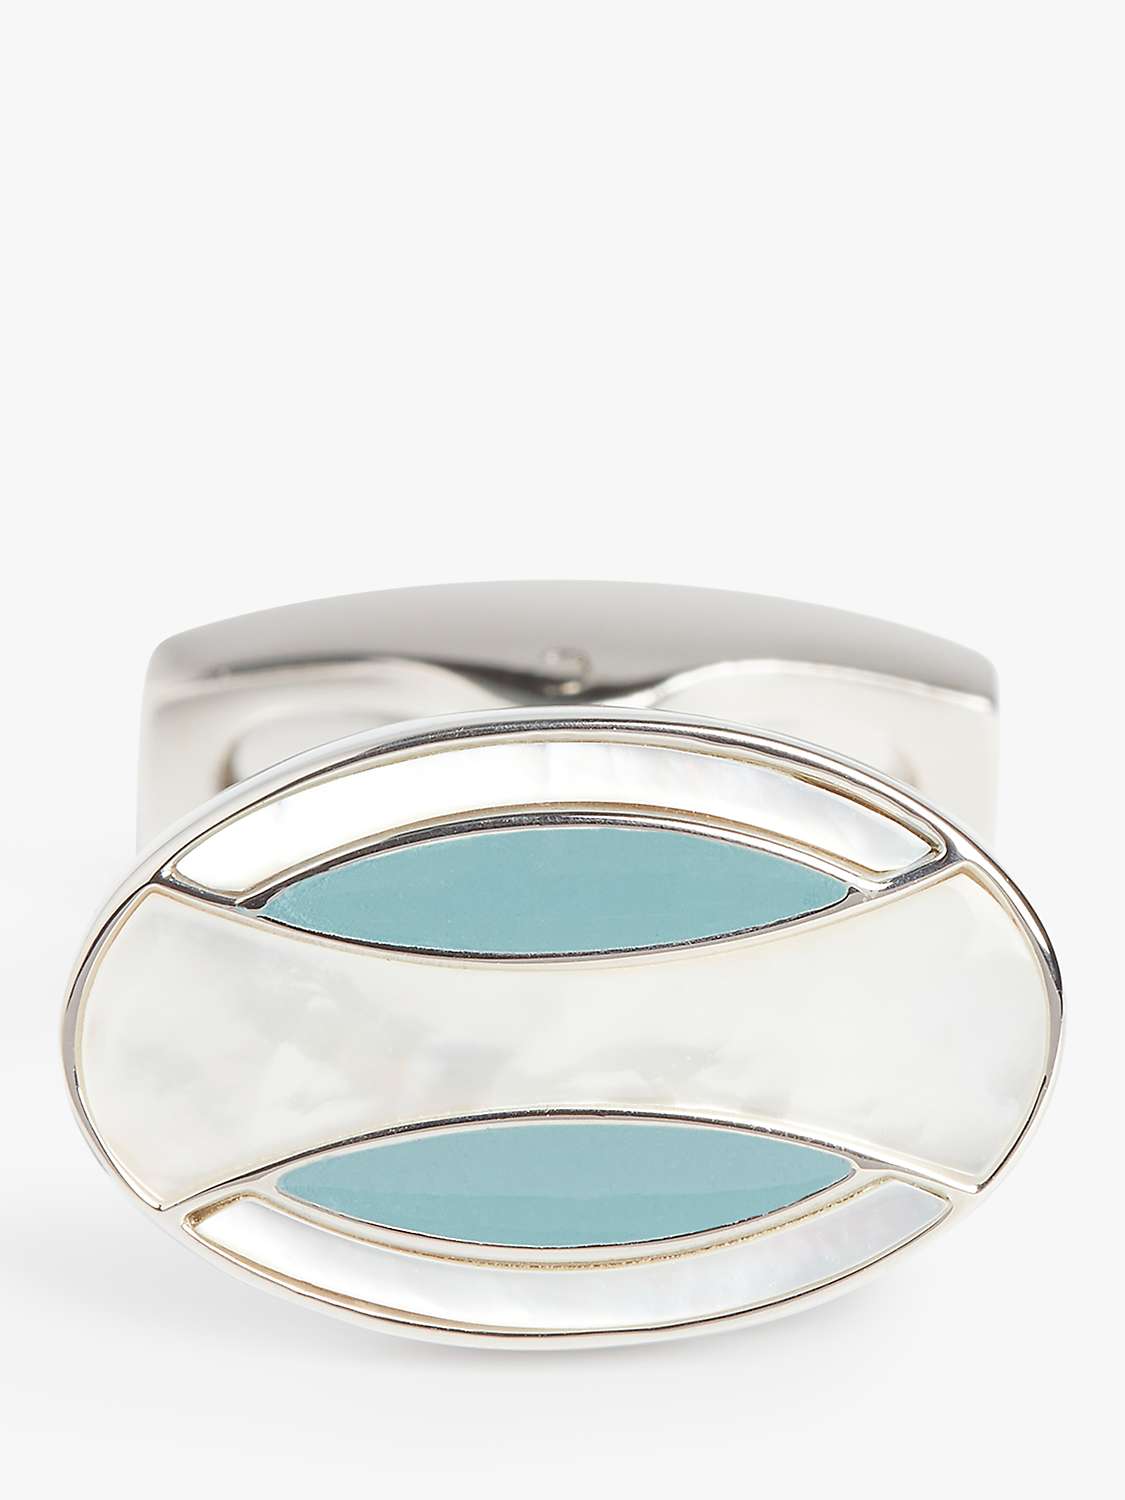 Buy Simon Carter Deco Curve Mother Of Pearl Cufflinks, White Silver Online at johnlewis.com